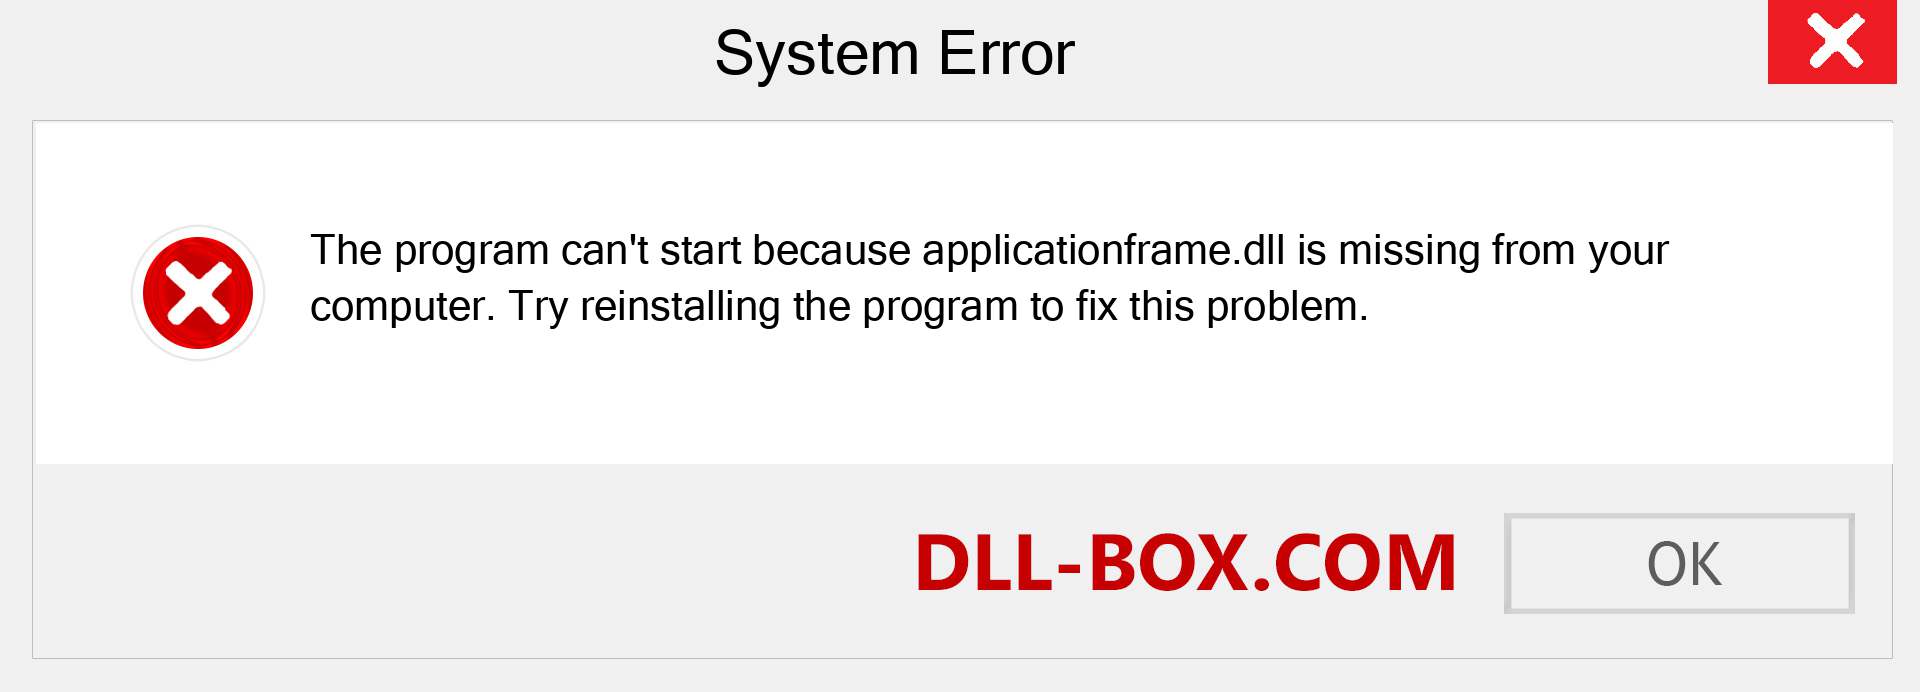  applicationframe.dll file is missing?. Download for Windows 7, 8, 10 - Fix  applicationframe dll Missing Error on Windows, photos, images